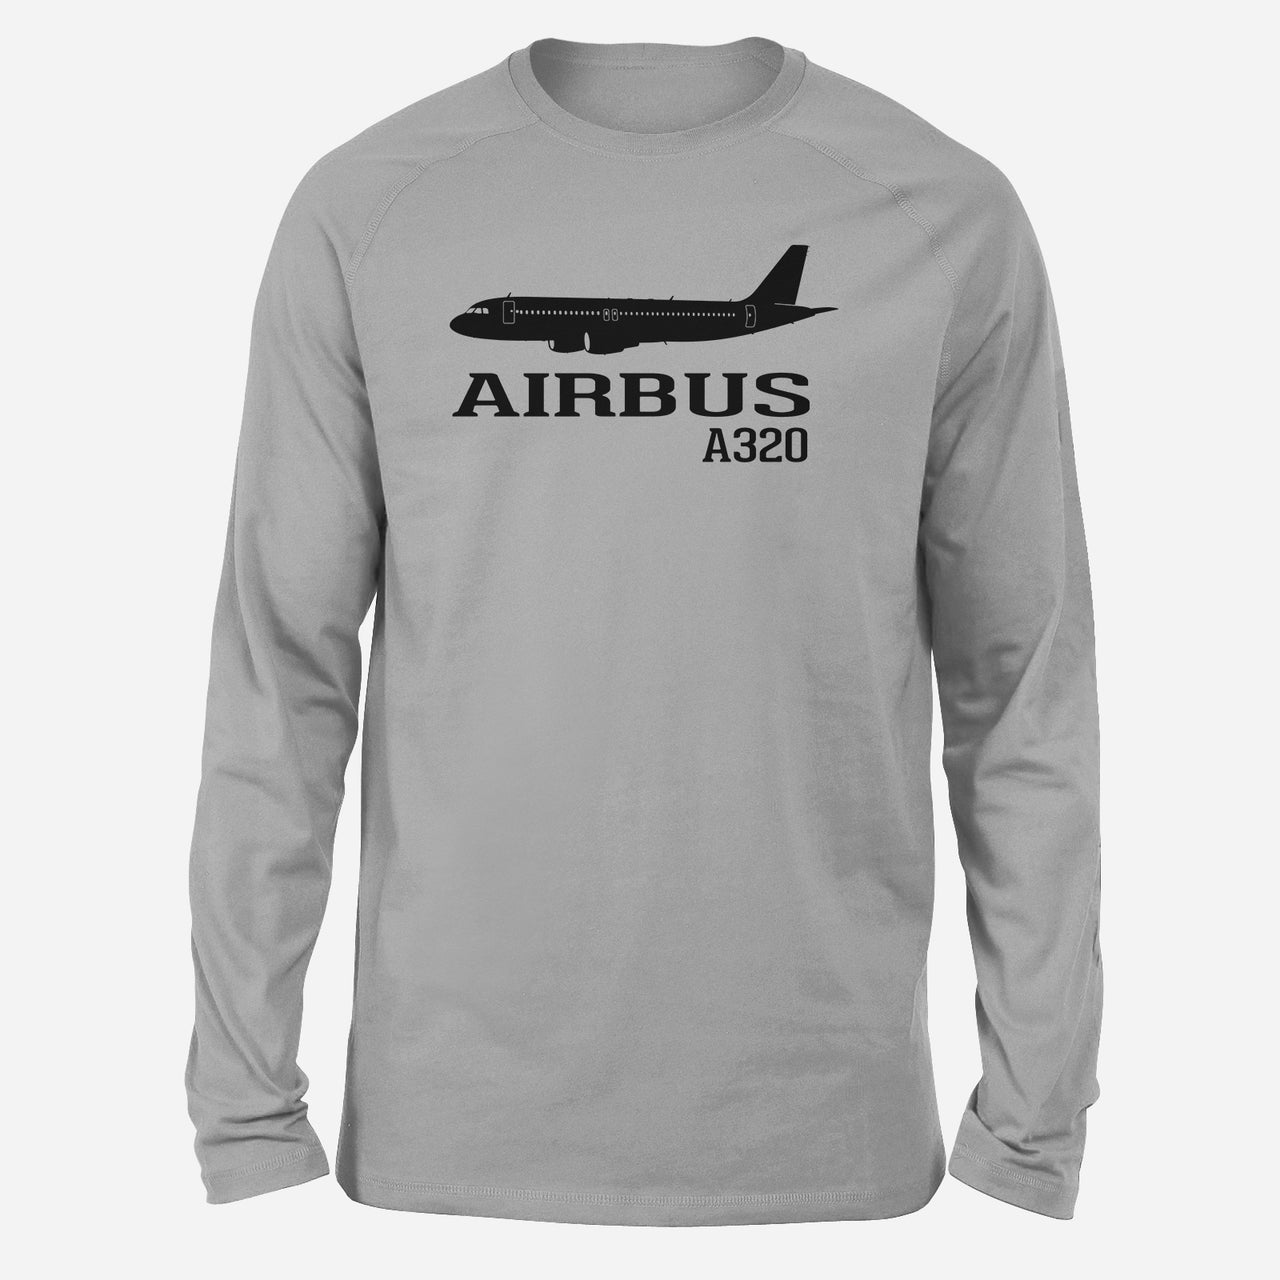 Airbus A320 Printed Designed Long-Sleeve T-Shirts